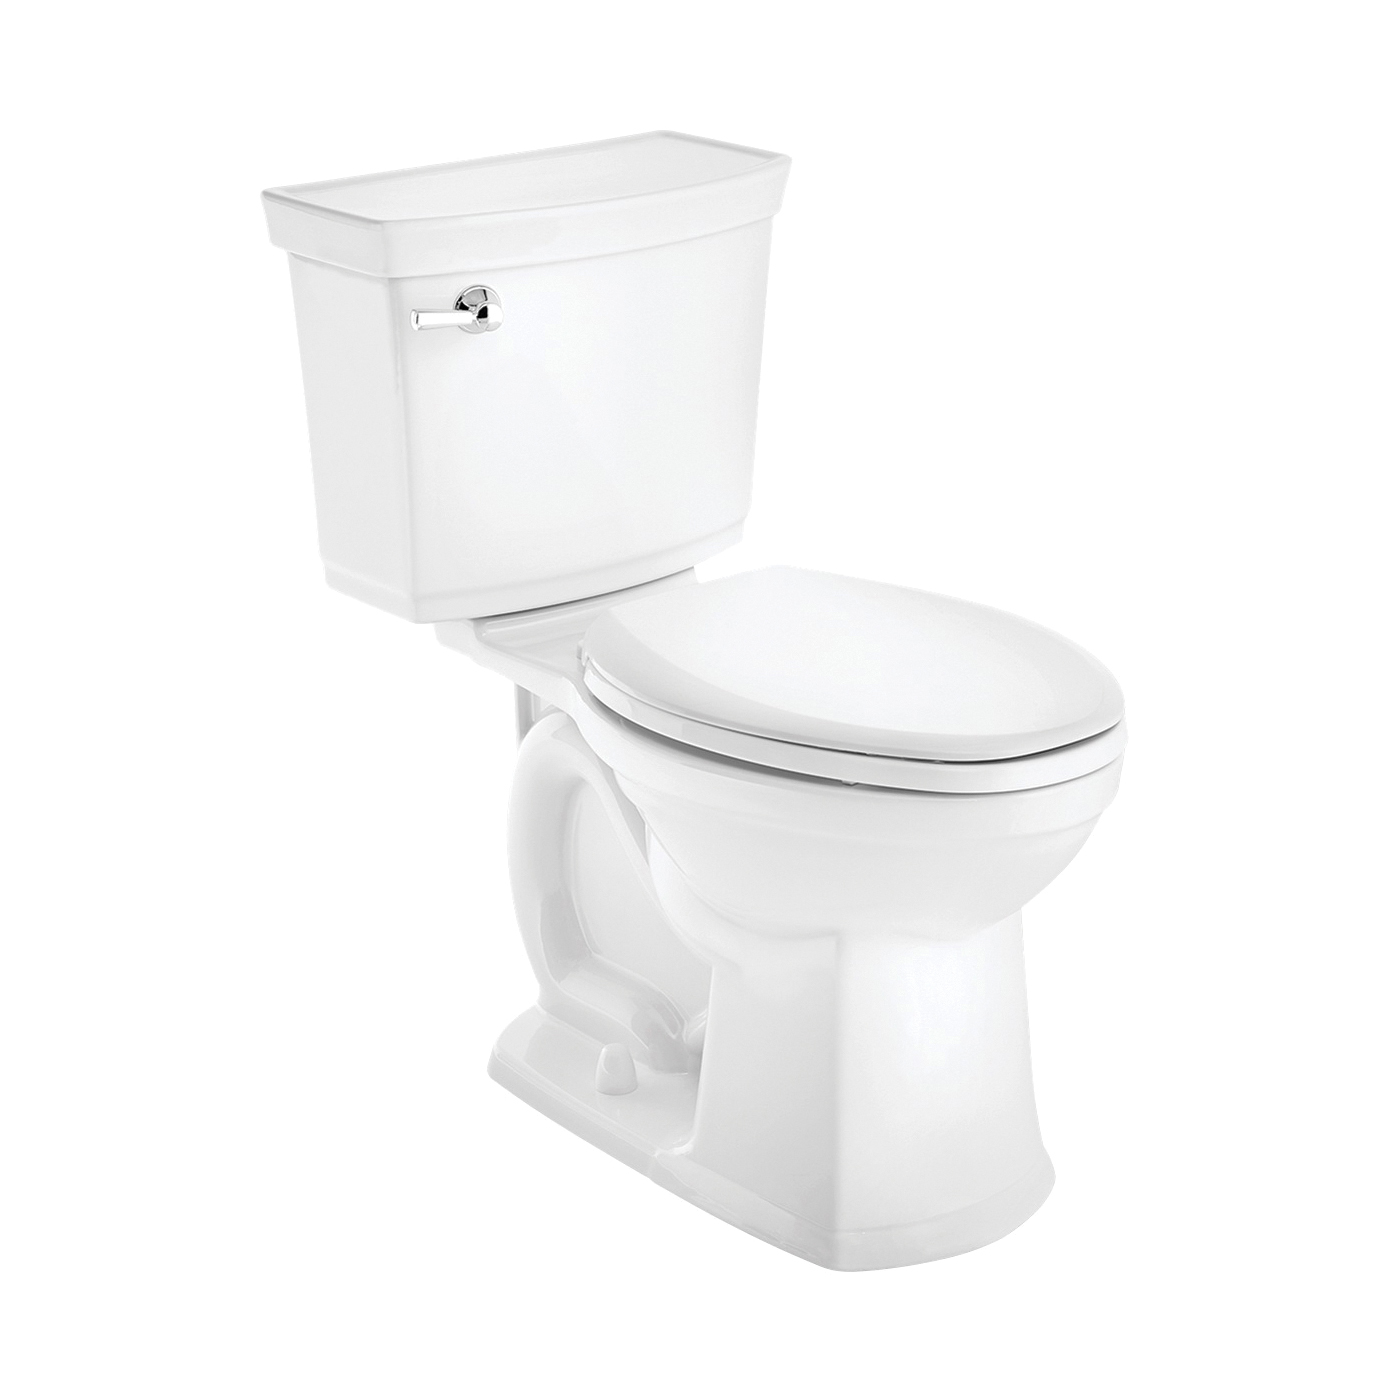 American Standard VorMax 727AA121.020 Complete Toilet, Elongated Bowl, 1.28 gpf Flush, 12 in Rough-In, 16-1/2 in H Rim